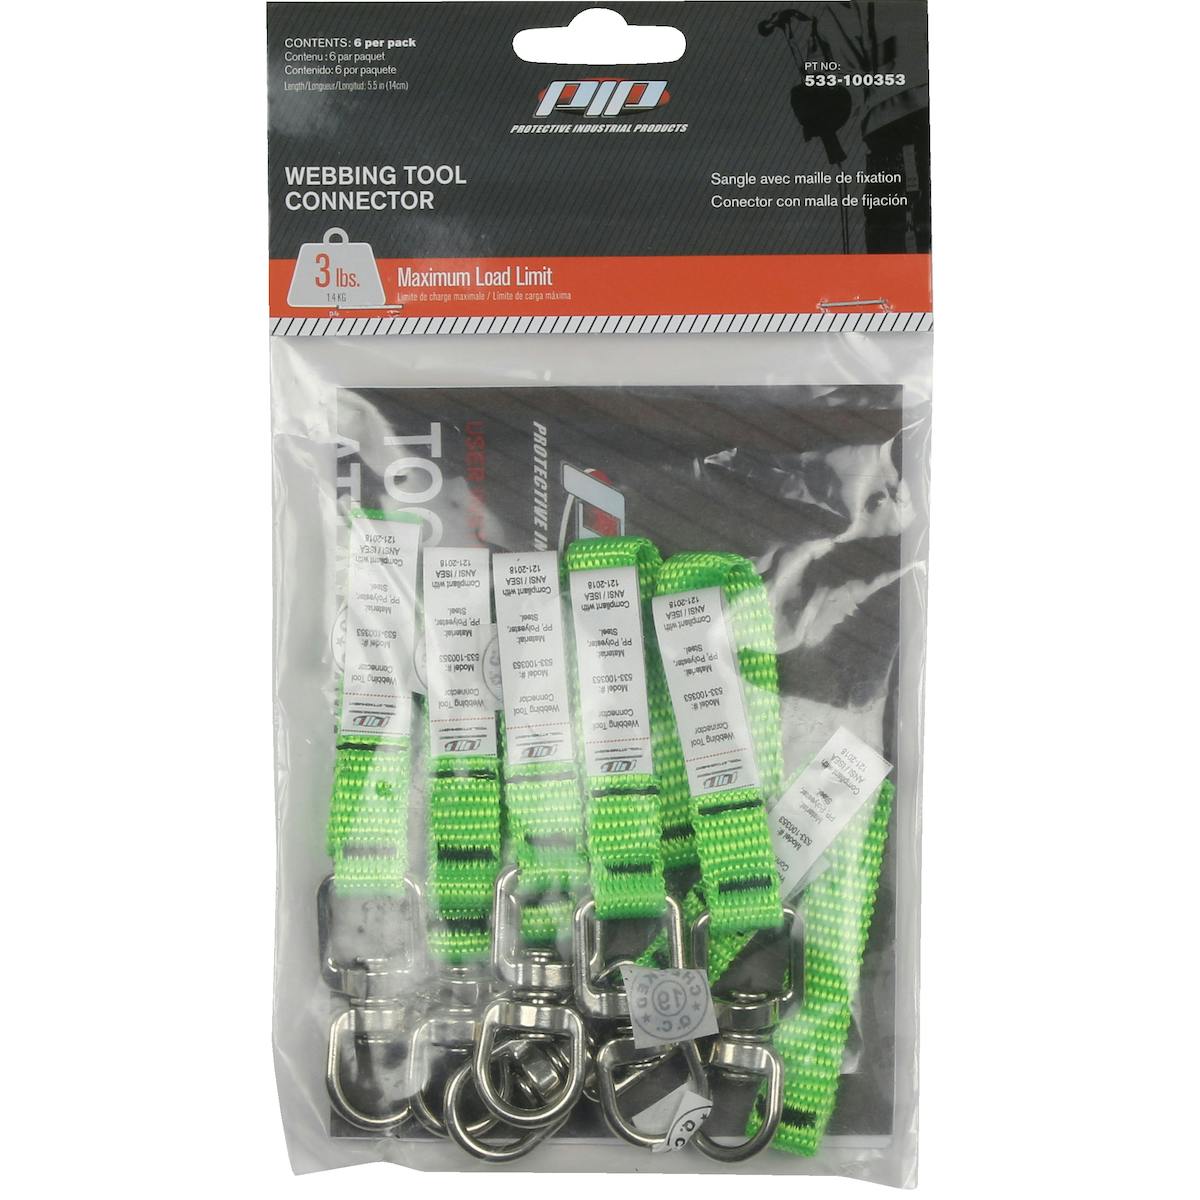 Webbing Tool Connector 5.5" - 3 lbs. maximum load limit - Retail Packaged, Green (533-100353) - OS_0